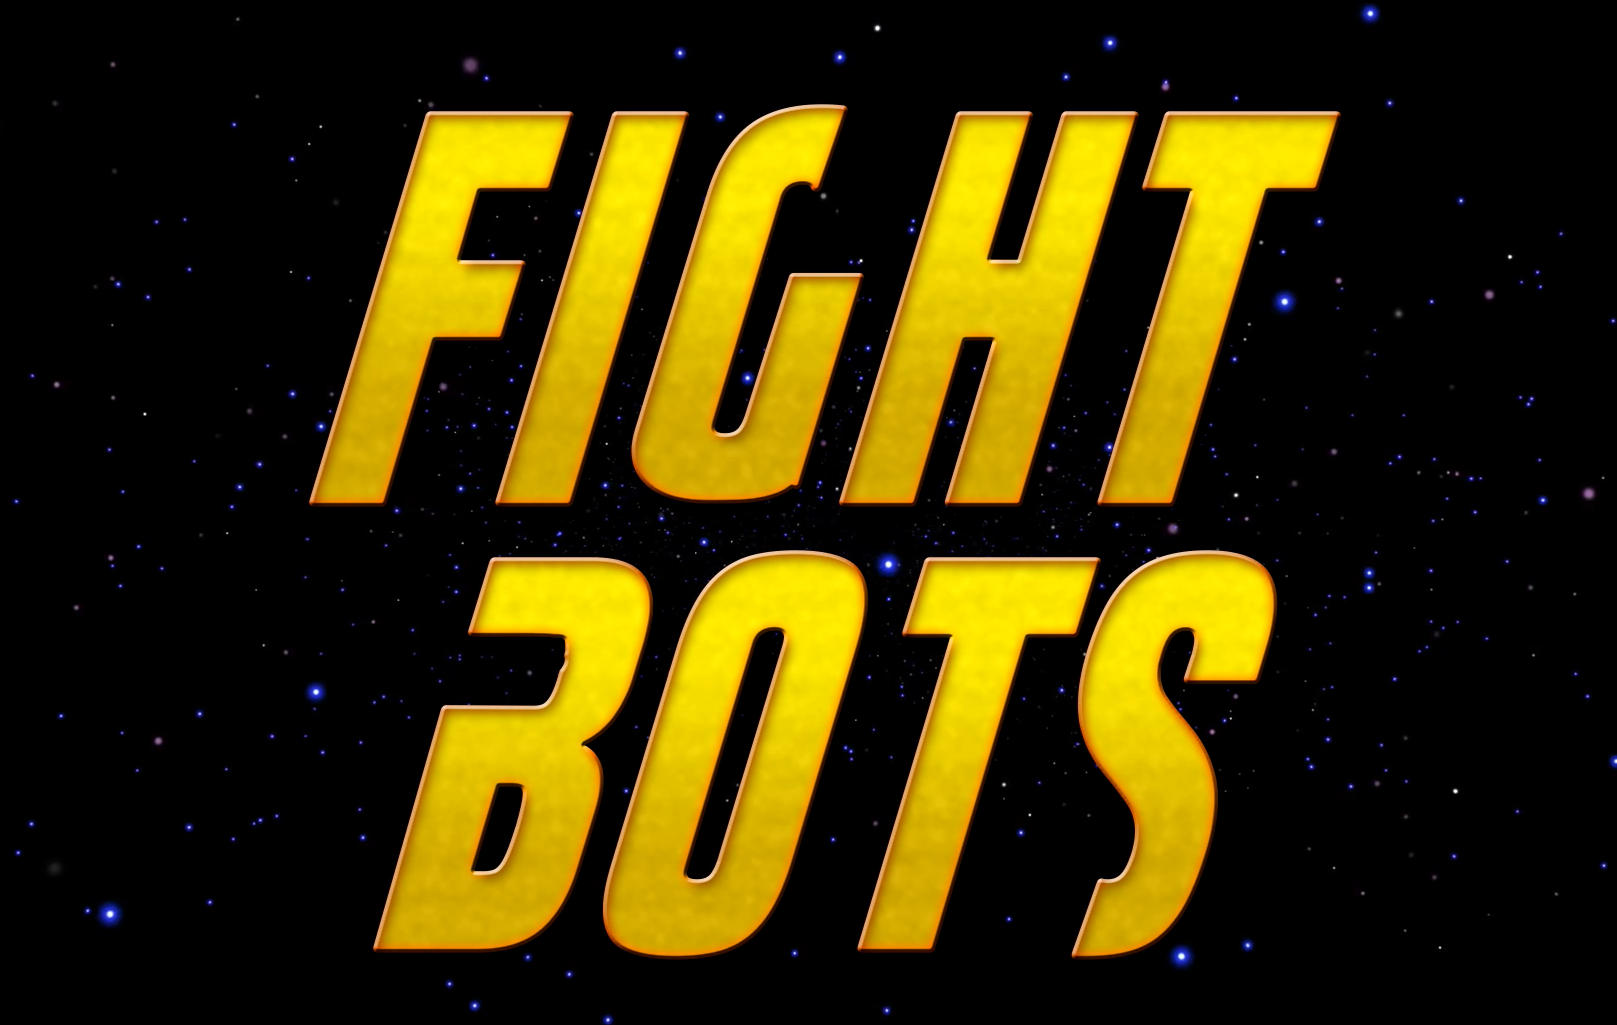 FIGHT BOTS Free Download